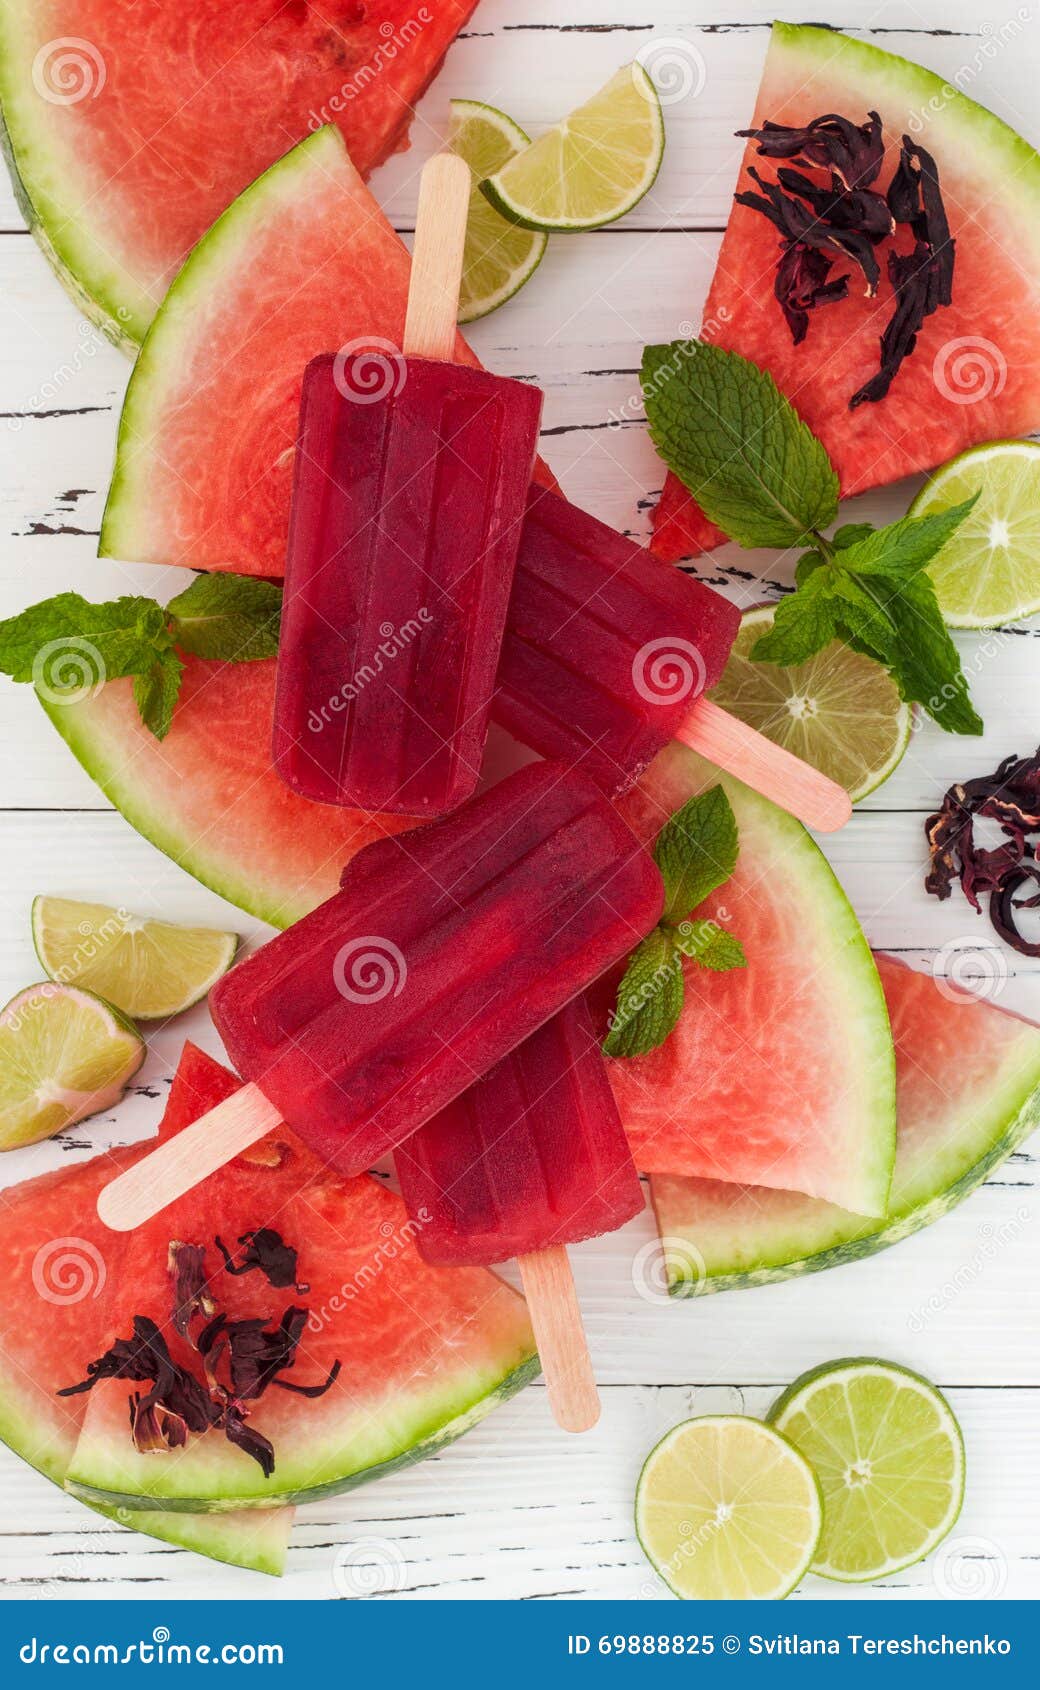 refreshing mexican style ice pops - watermelon, hibiscus, lime paletas - ice pops - popsicles, served on watermelon slices with li